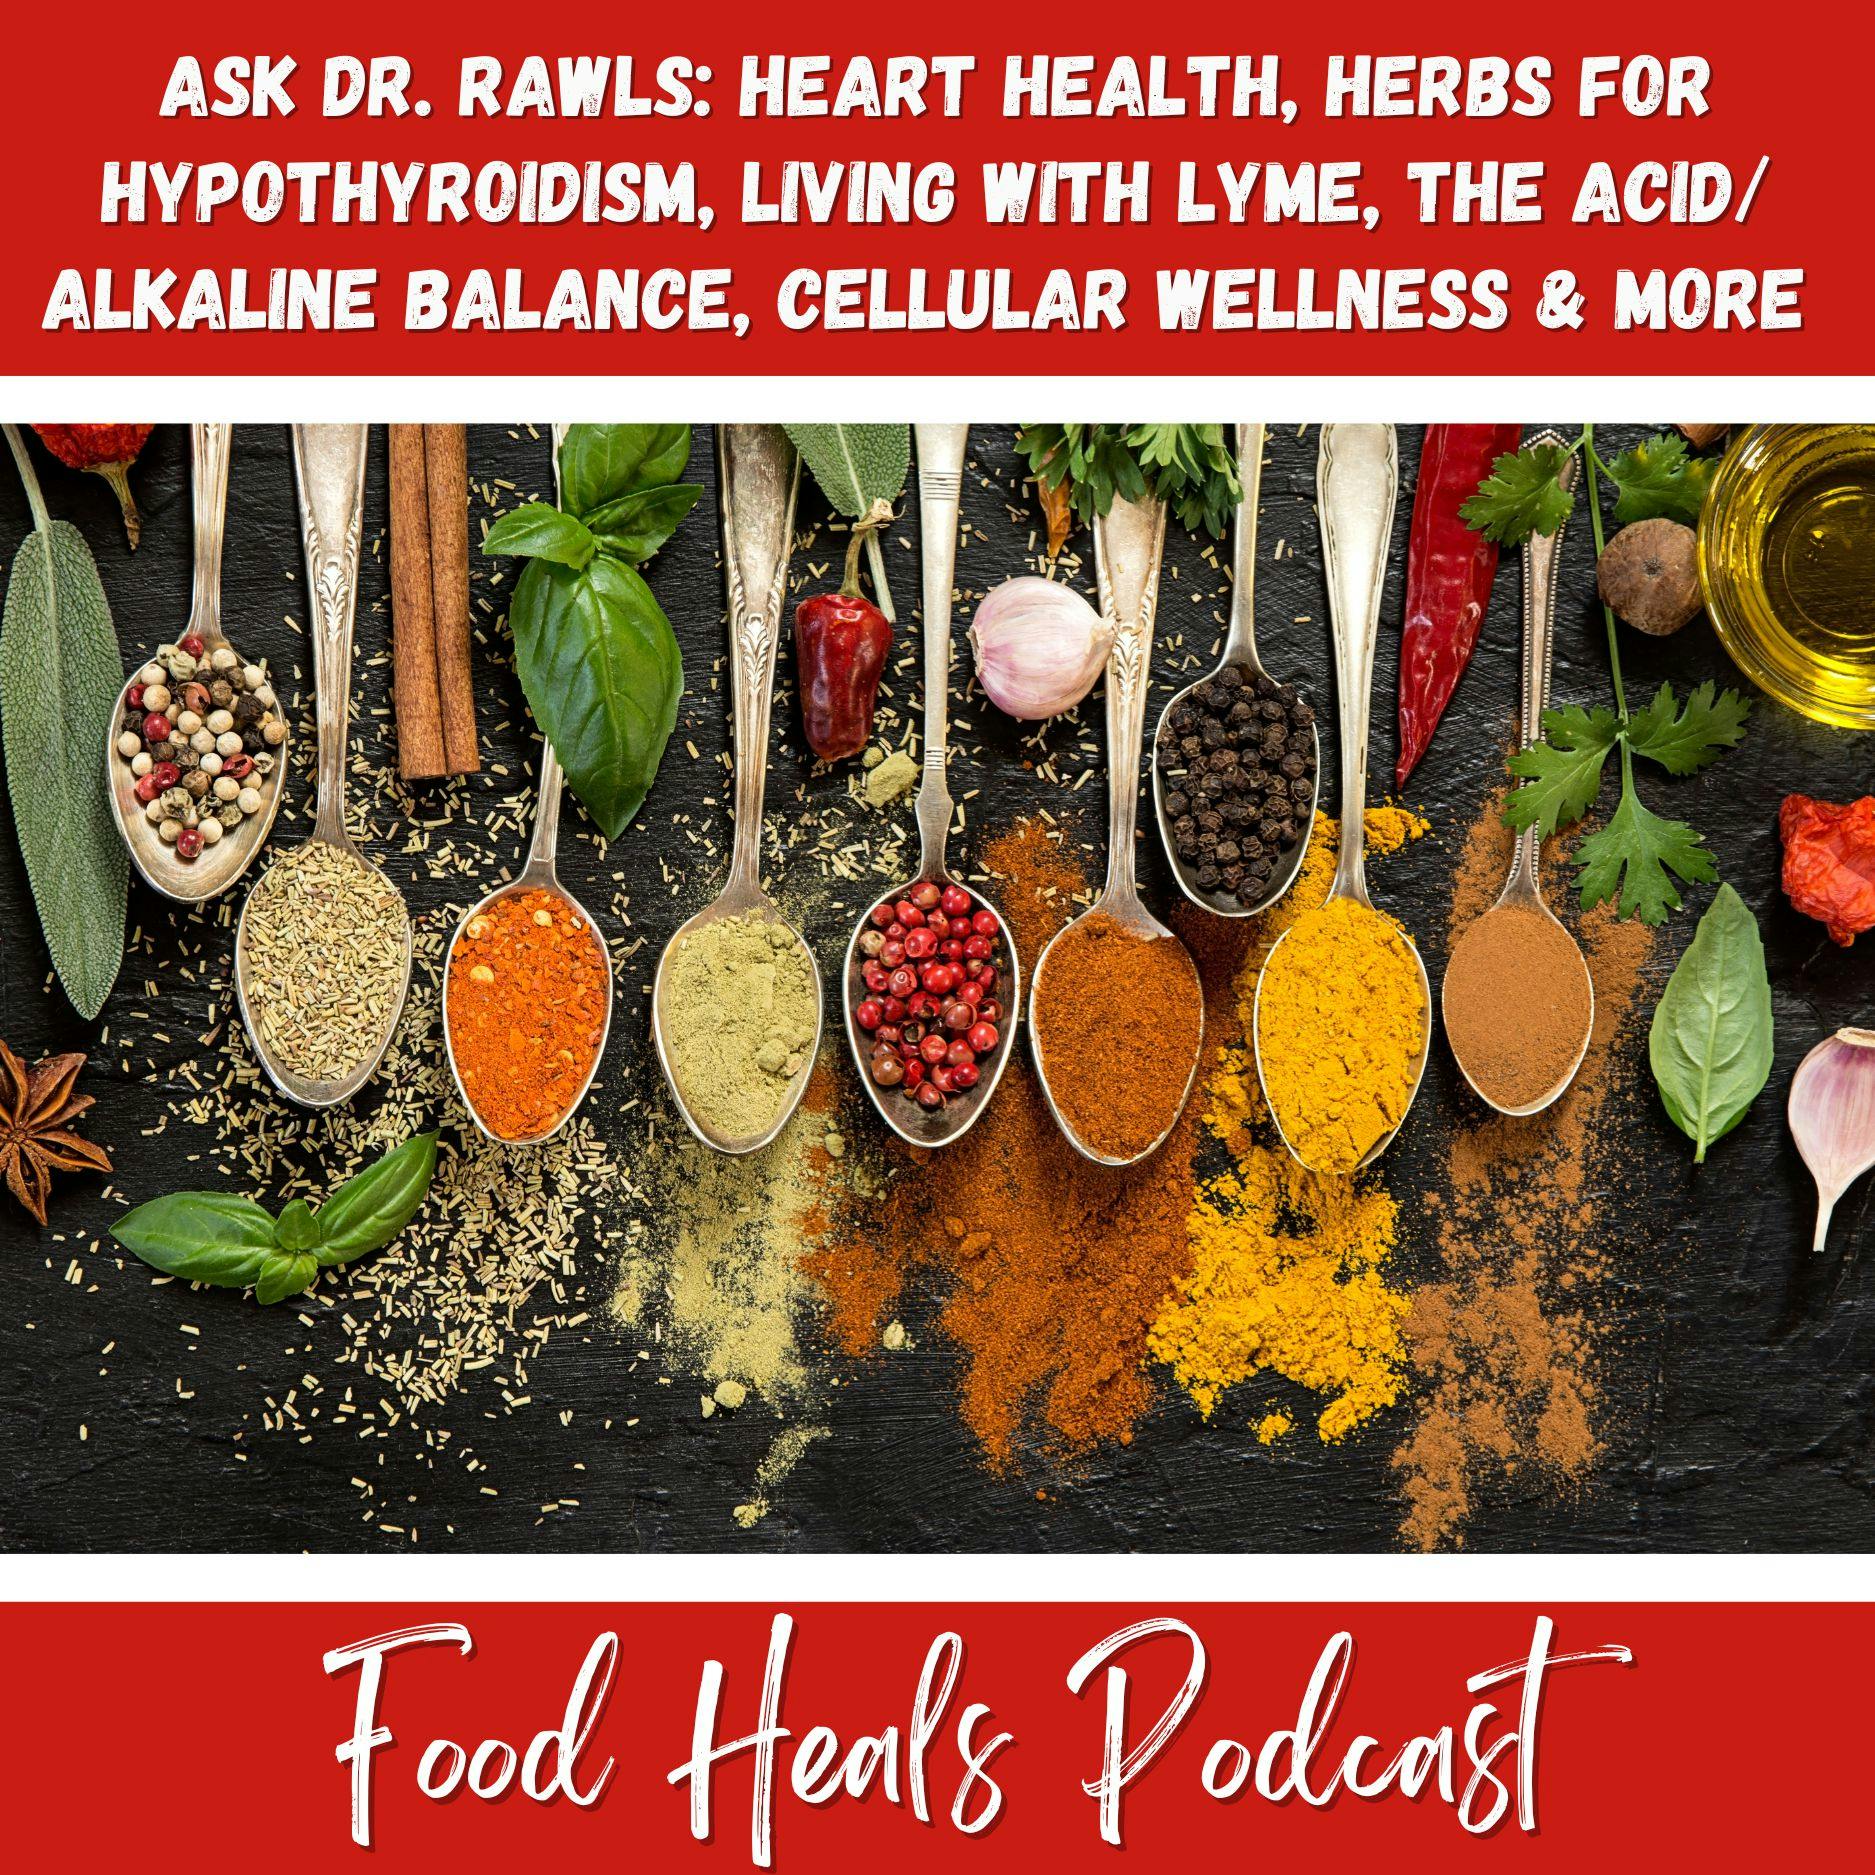 The Food Heals Podcast  424: Forgiveness is Freedom plus a Candid  Conversation on Mental Health with Katie Krimitsos and Ashley Fillingim